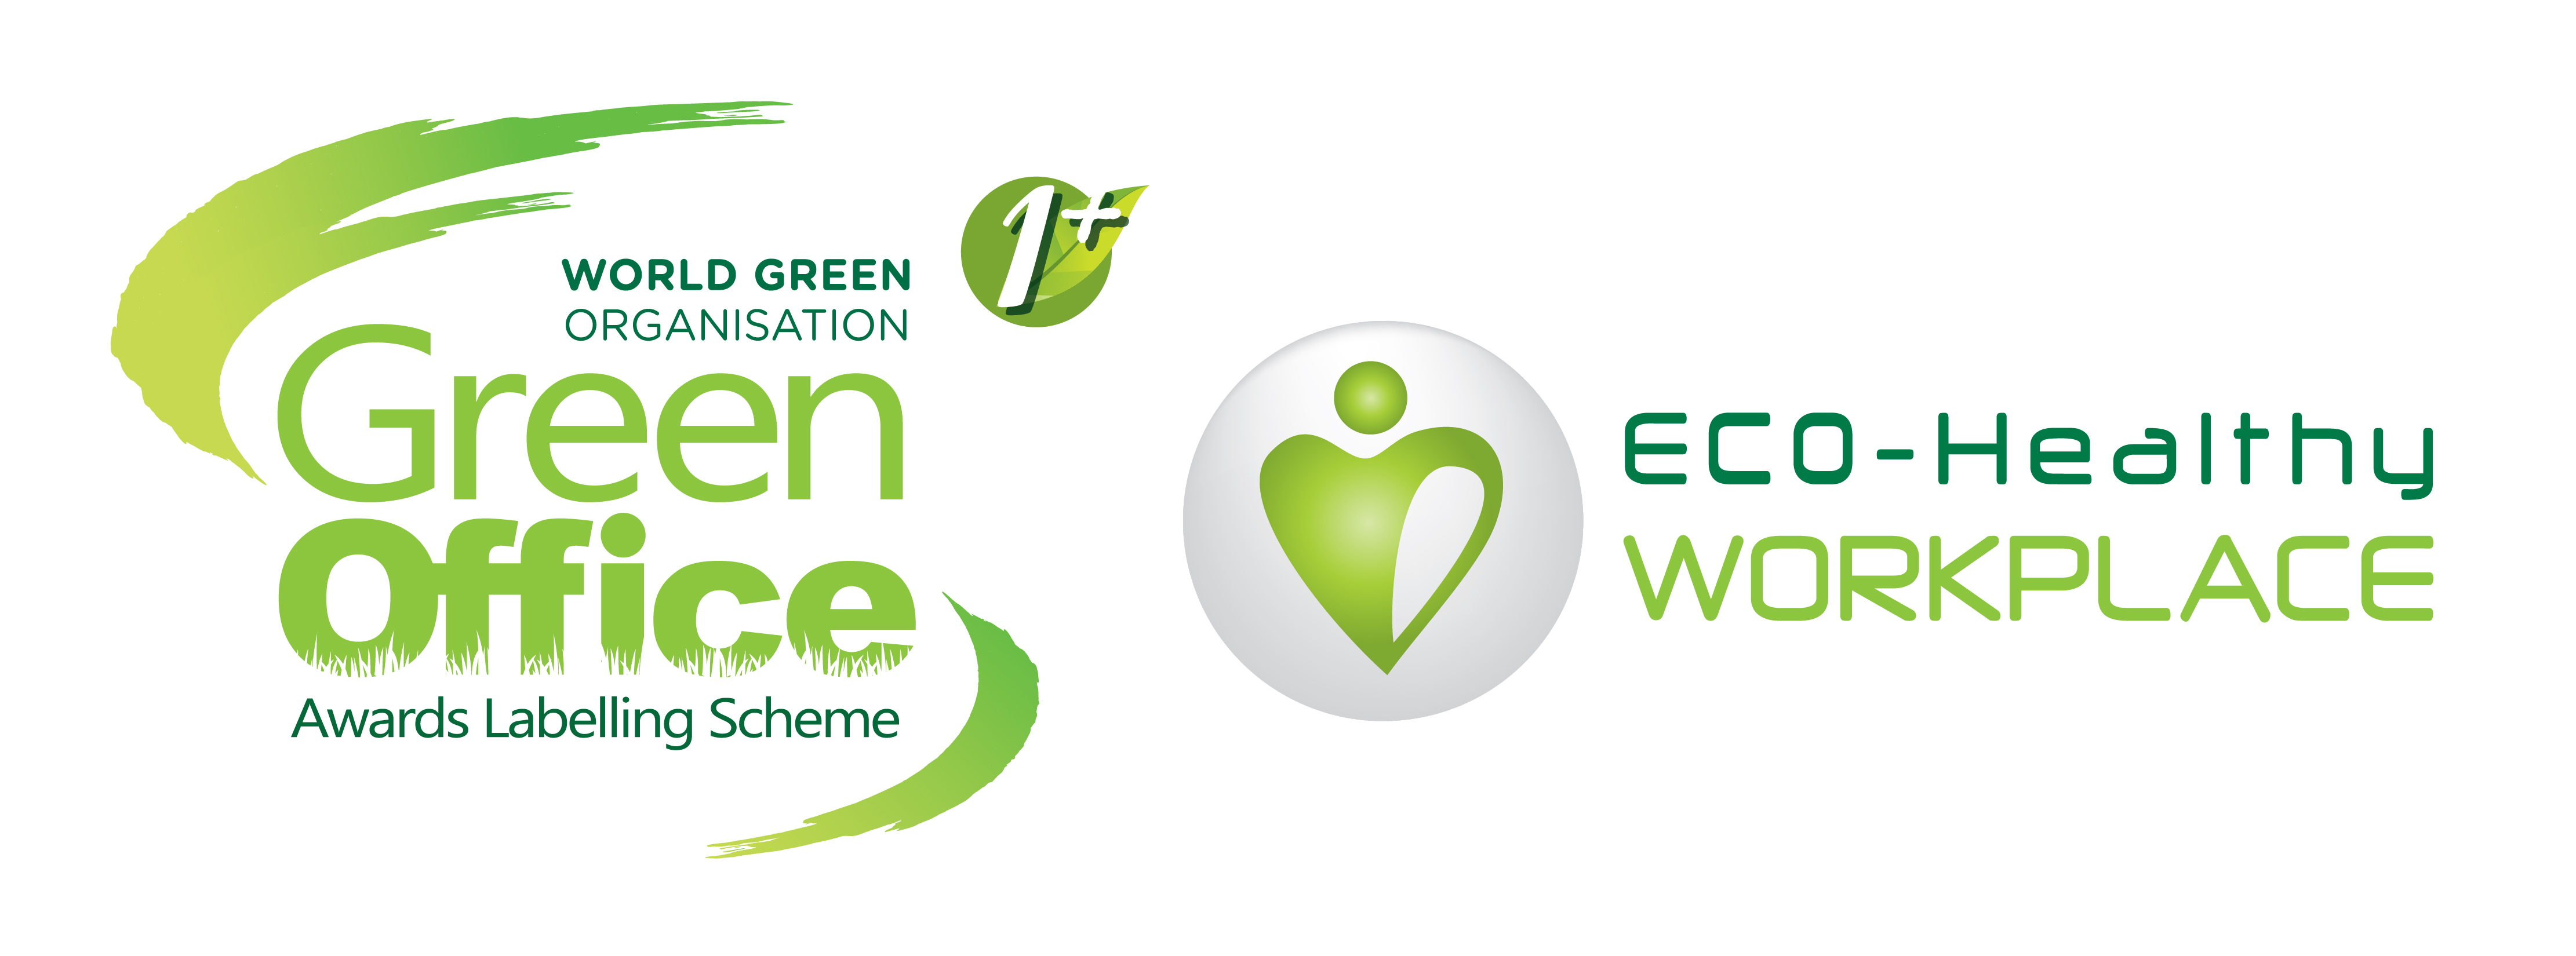 World Green Organisation's Green Office Awards Labelling Scheme, Eco-Healthy Workplace